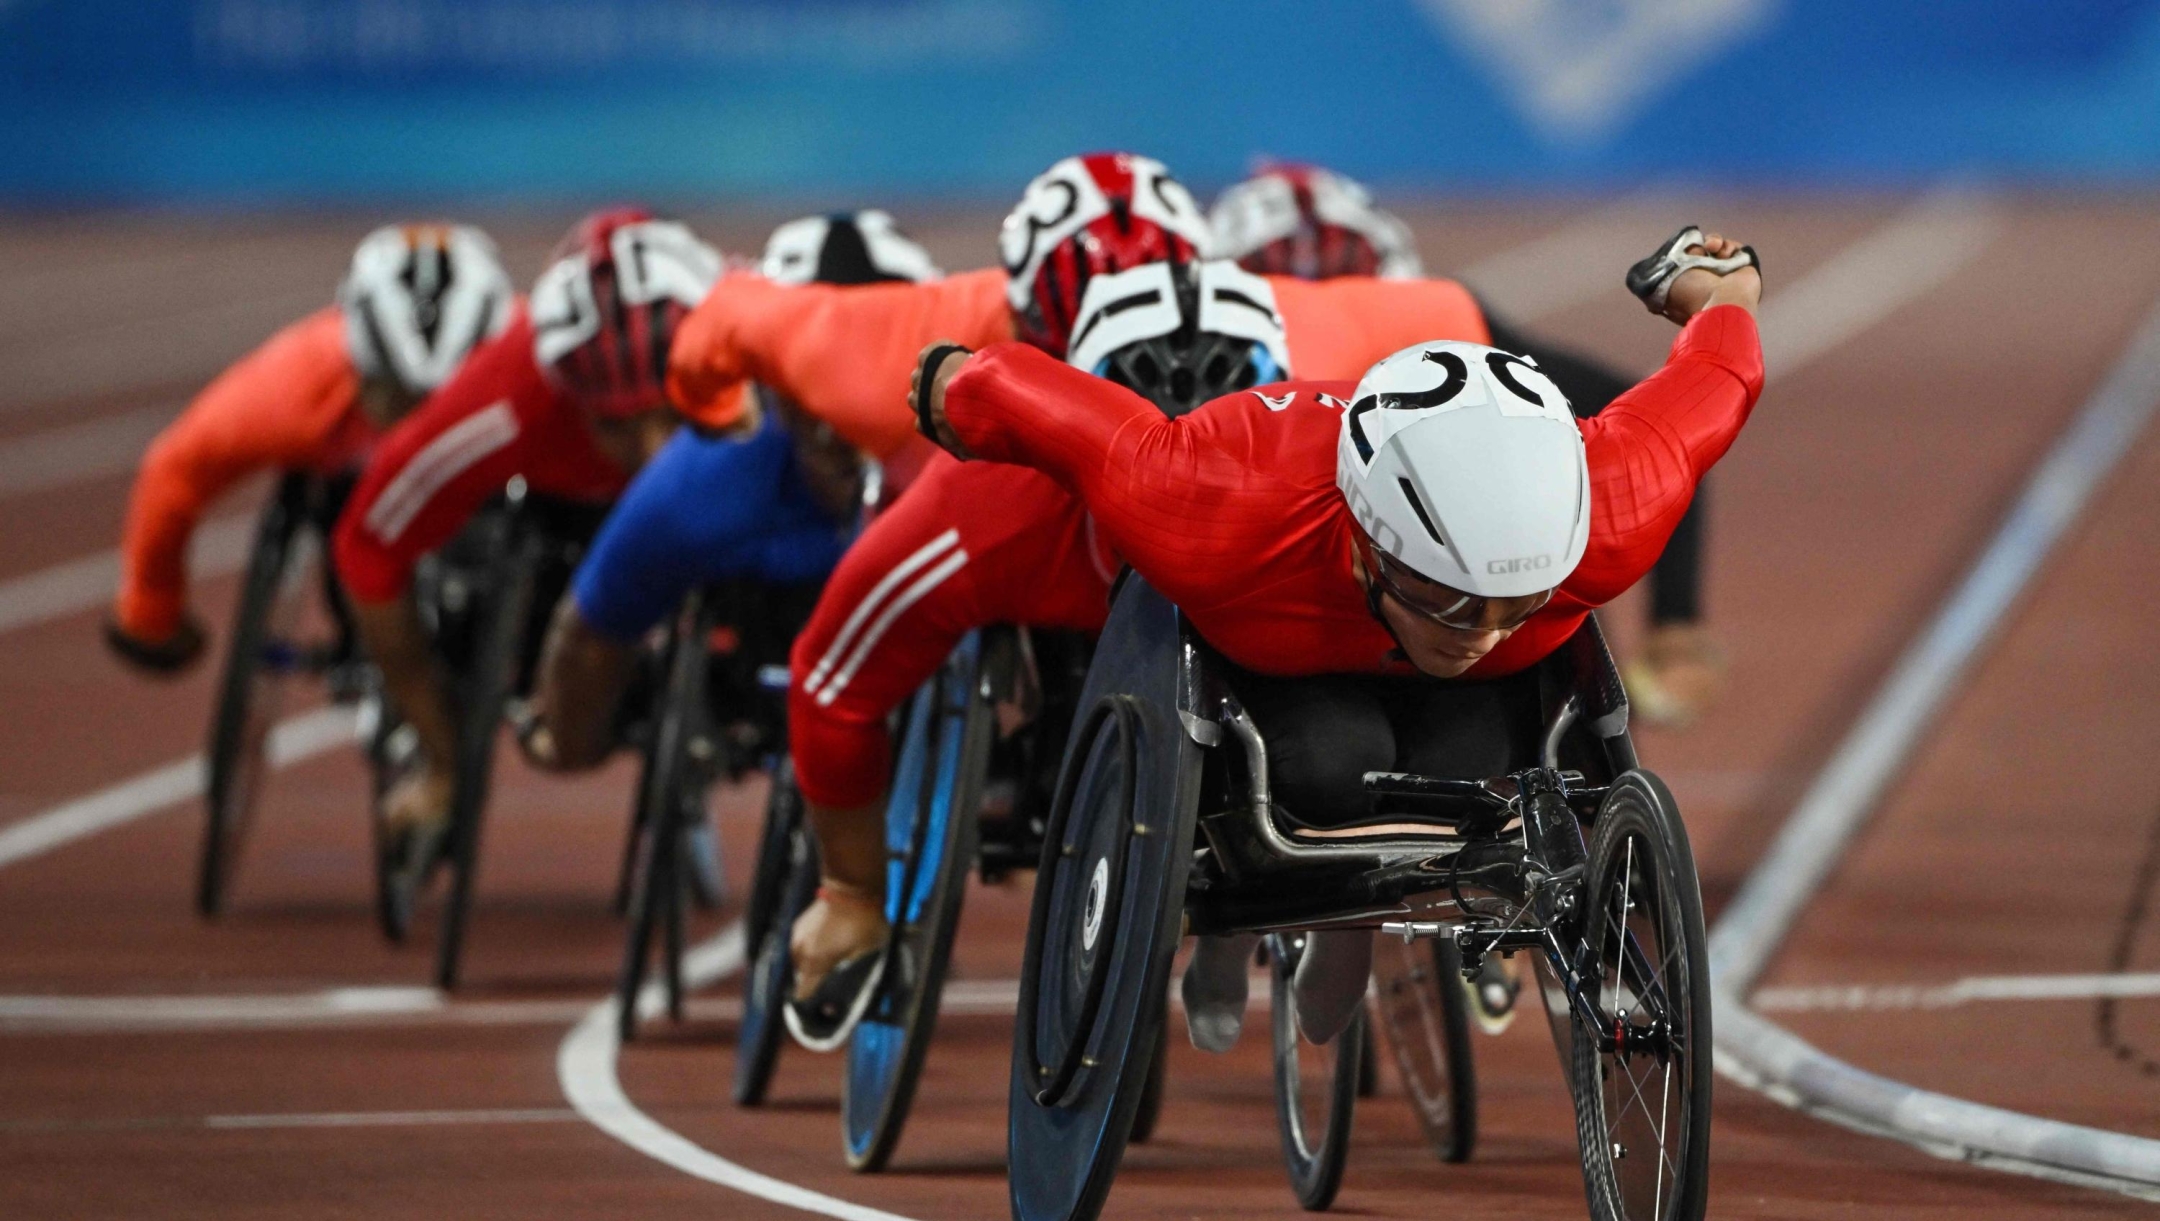 Athletes compete in the men's 5000m-T54 final at the Huanglong Sport Centre Stadium during the 2022 Asian Para Games in Hangzhou in China's eastern Zhejiang province on October 23, 2023. (Photo by Hector RETAMAL / AFP)